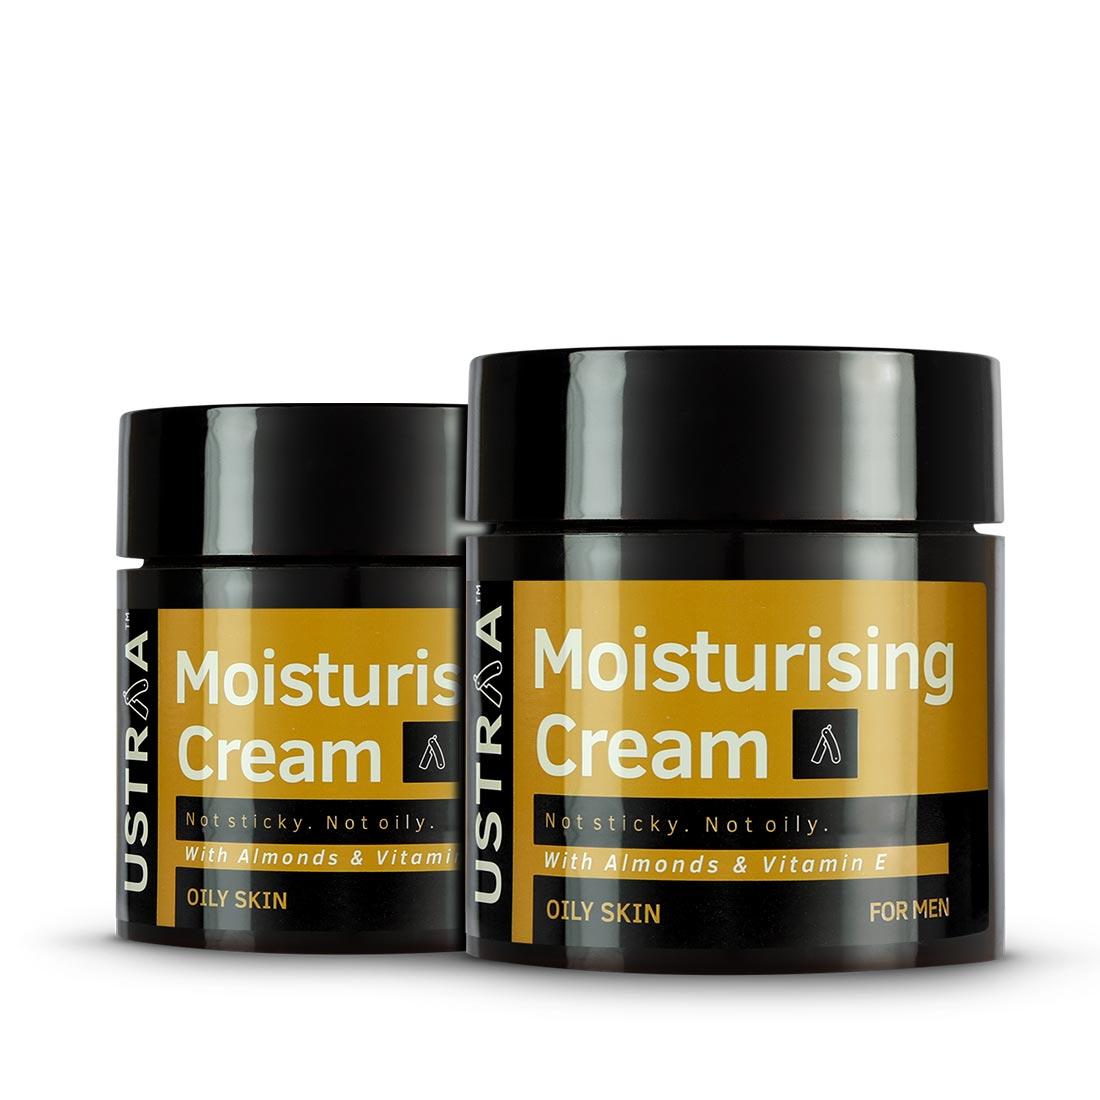 Ustraa Moisturising Cream for Oily Skin - Set of 2 - Keep Skin Healthy Moisturises & Nourishes with No Stickiness & Harmful Chemicals